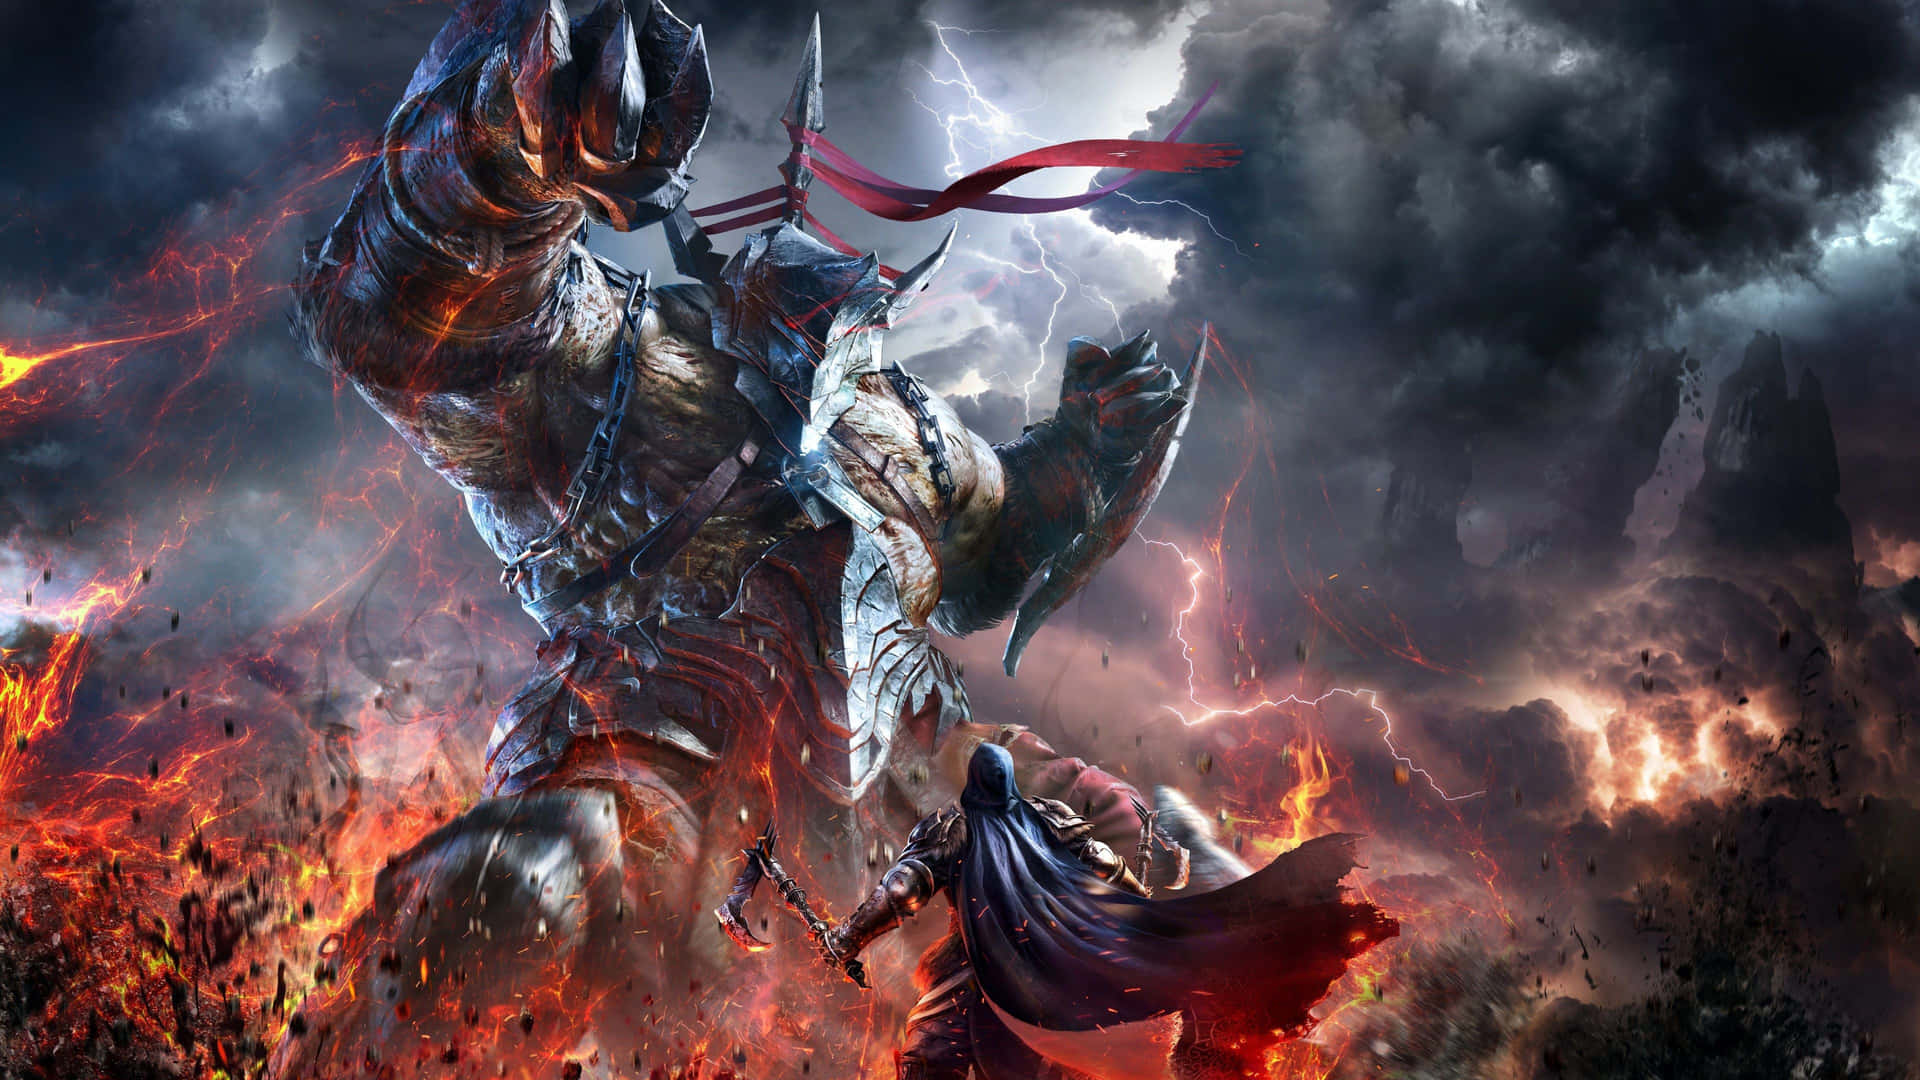 Epic Battle In The World Of Warcraft: Battle For Azeroth Wallpaper